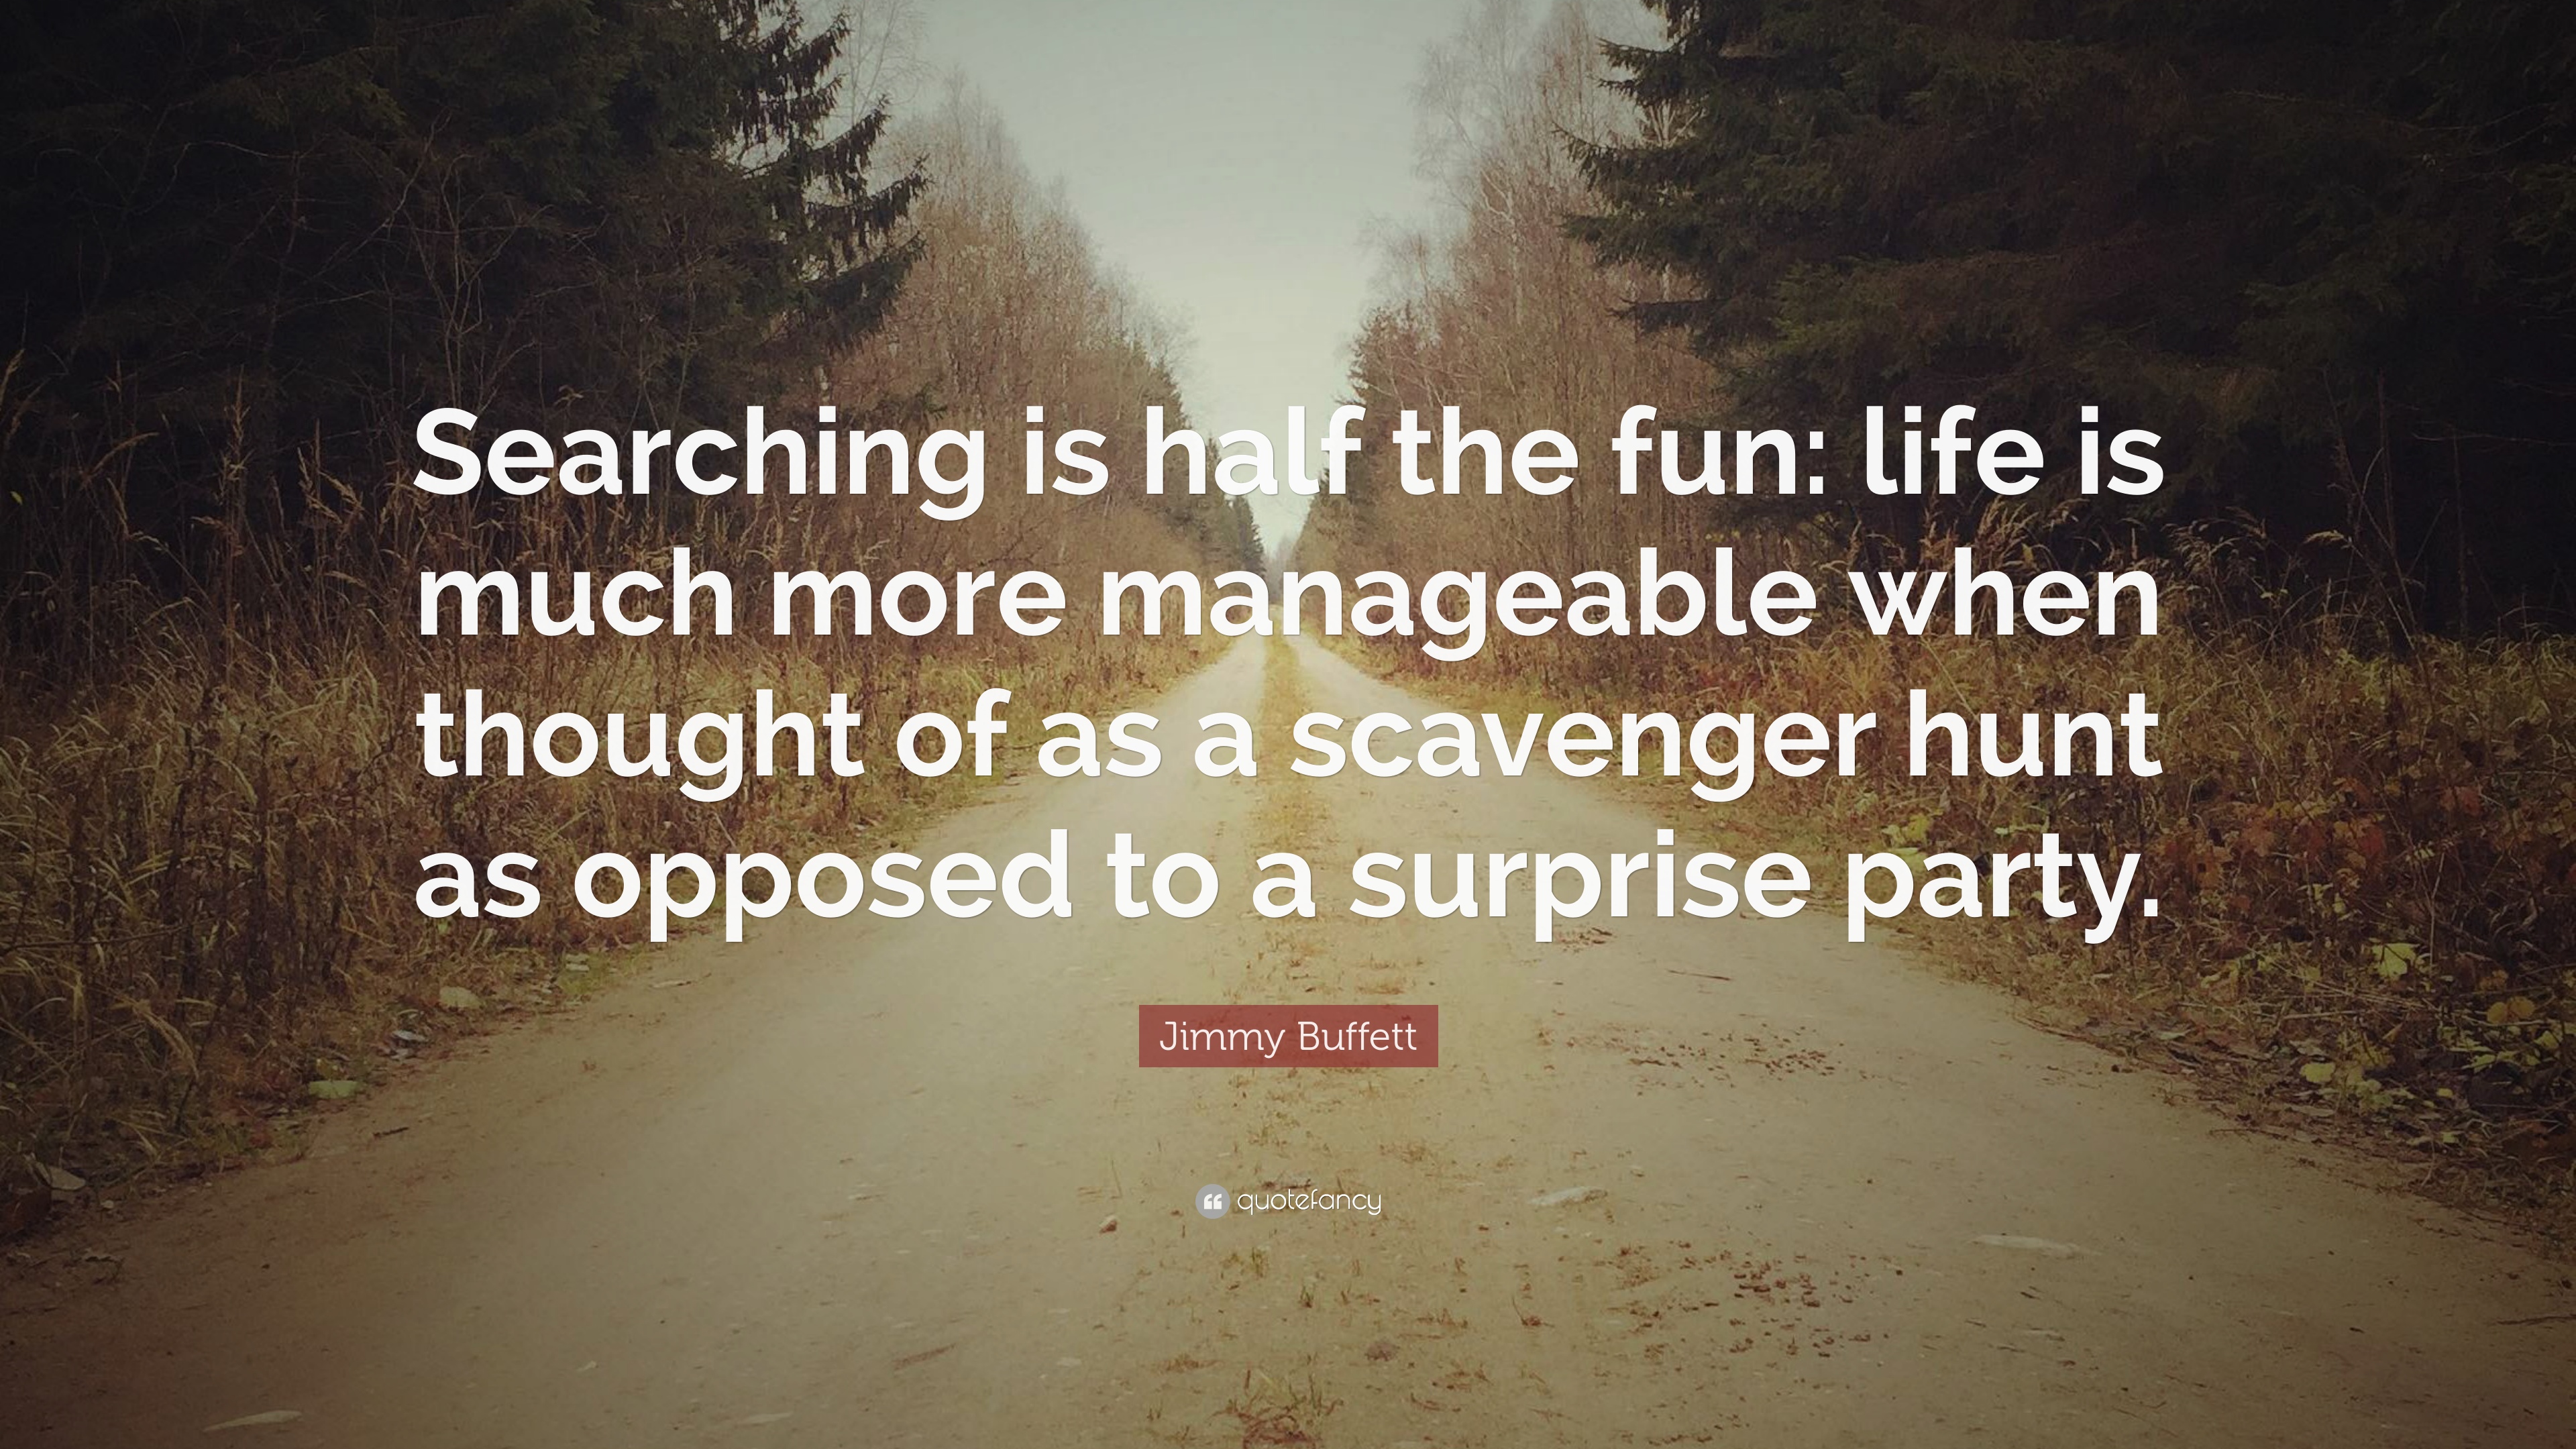 Jimmy Buffett Quote: “Searching is half the fun: life is much more